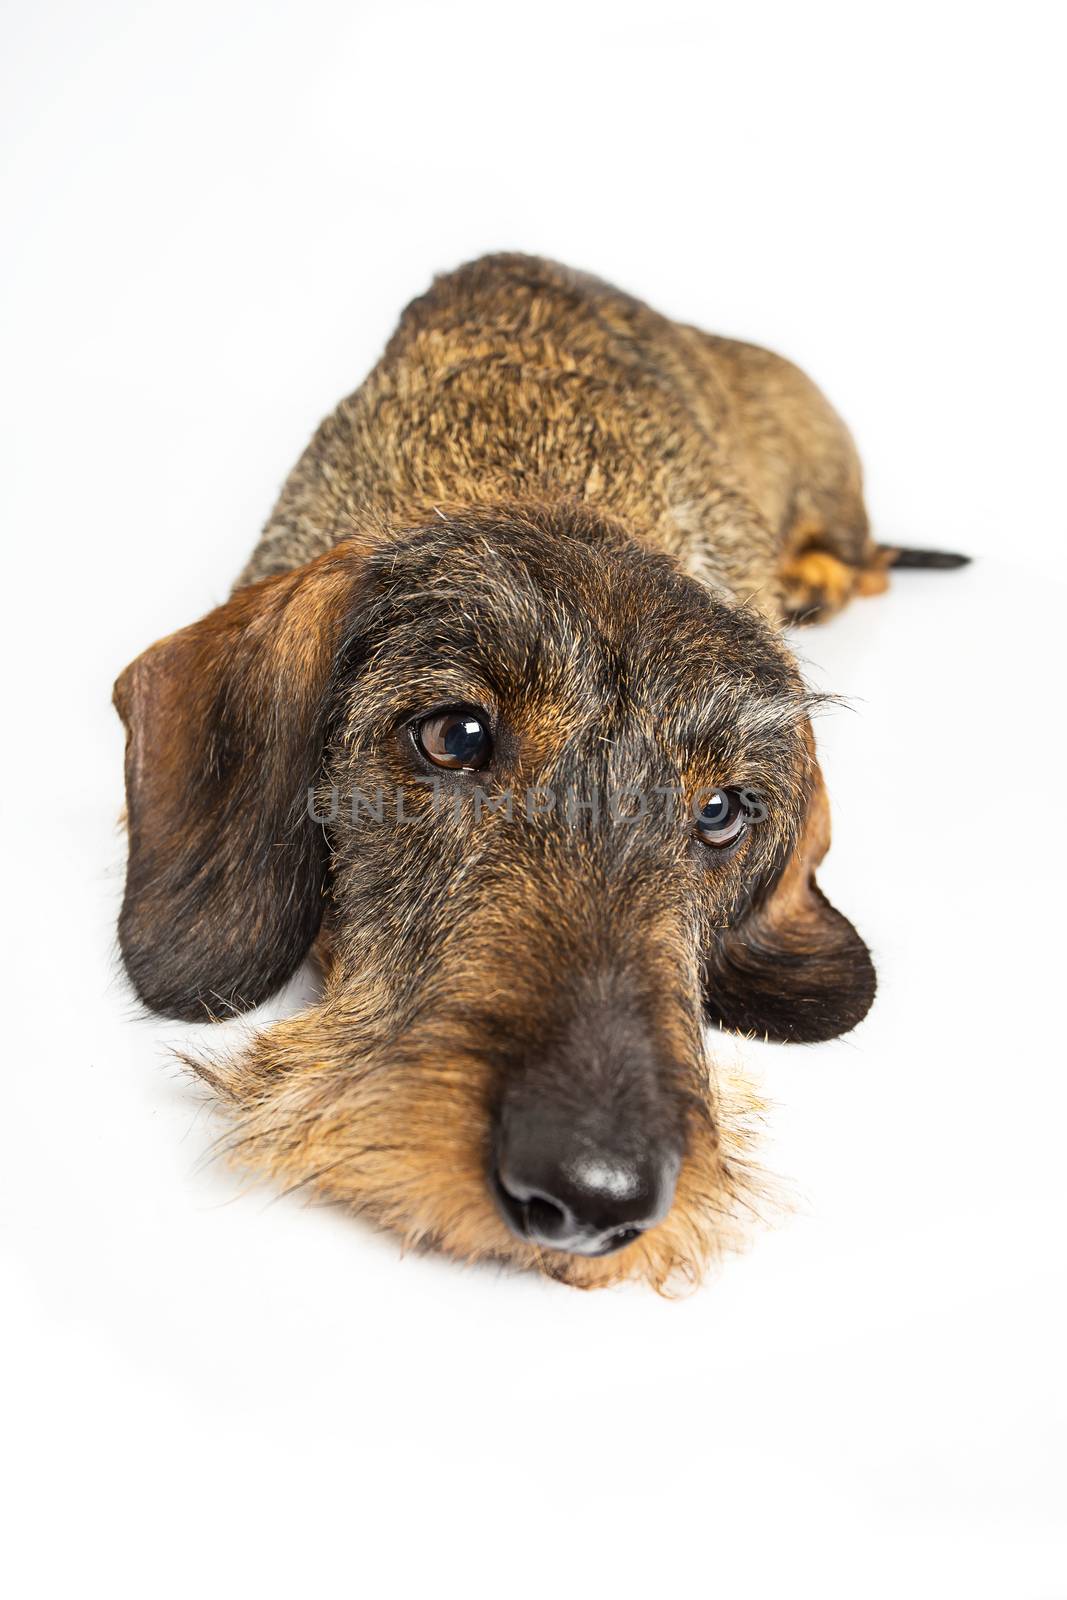 Wire haired dachshund dog laying down with a sad expression, isolated on a white background